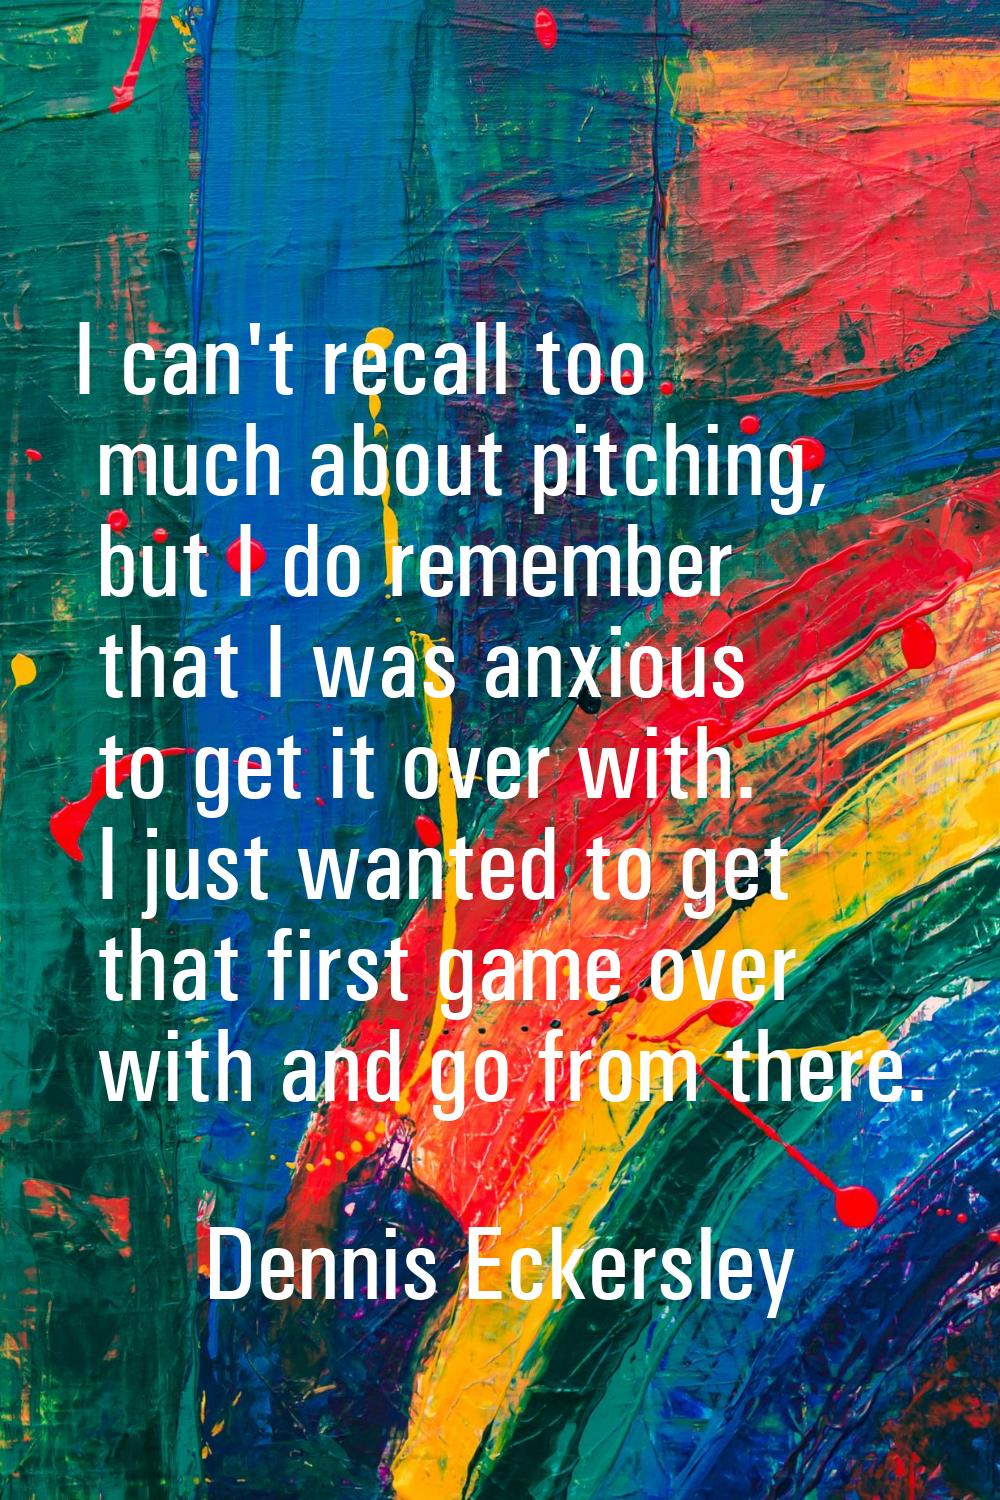 I can't recall too much about pitching, but I do remember that I was anxious to get it over with. I